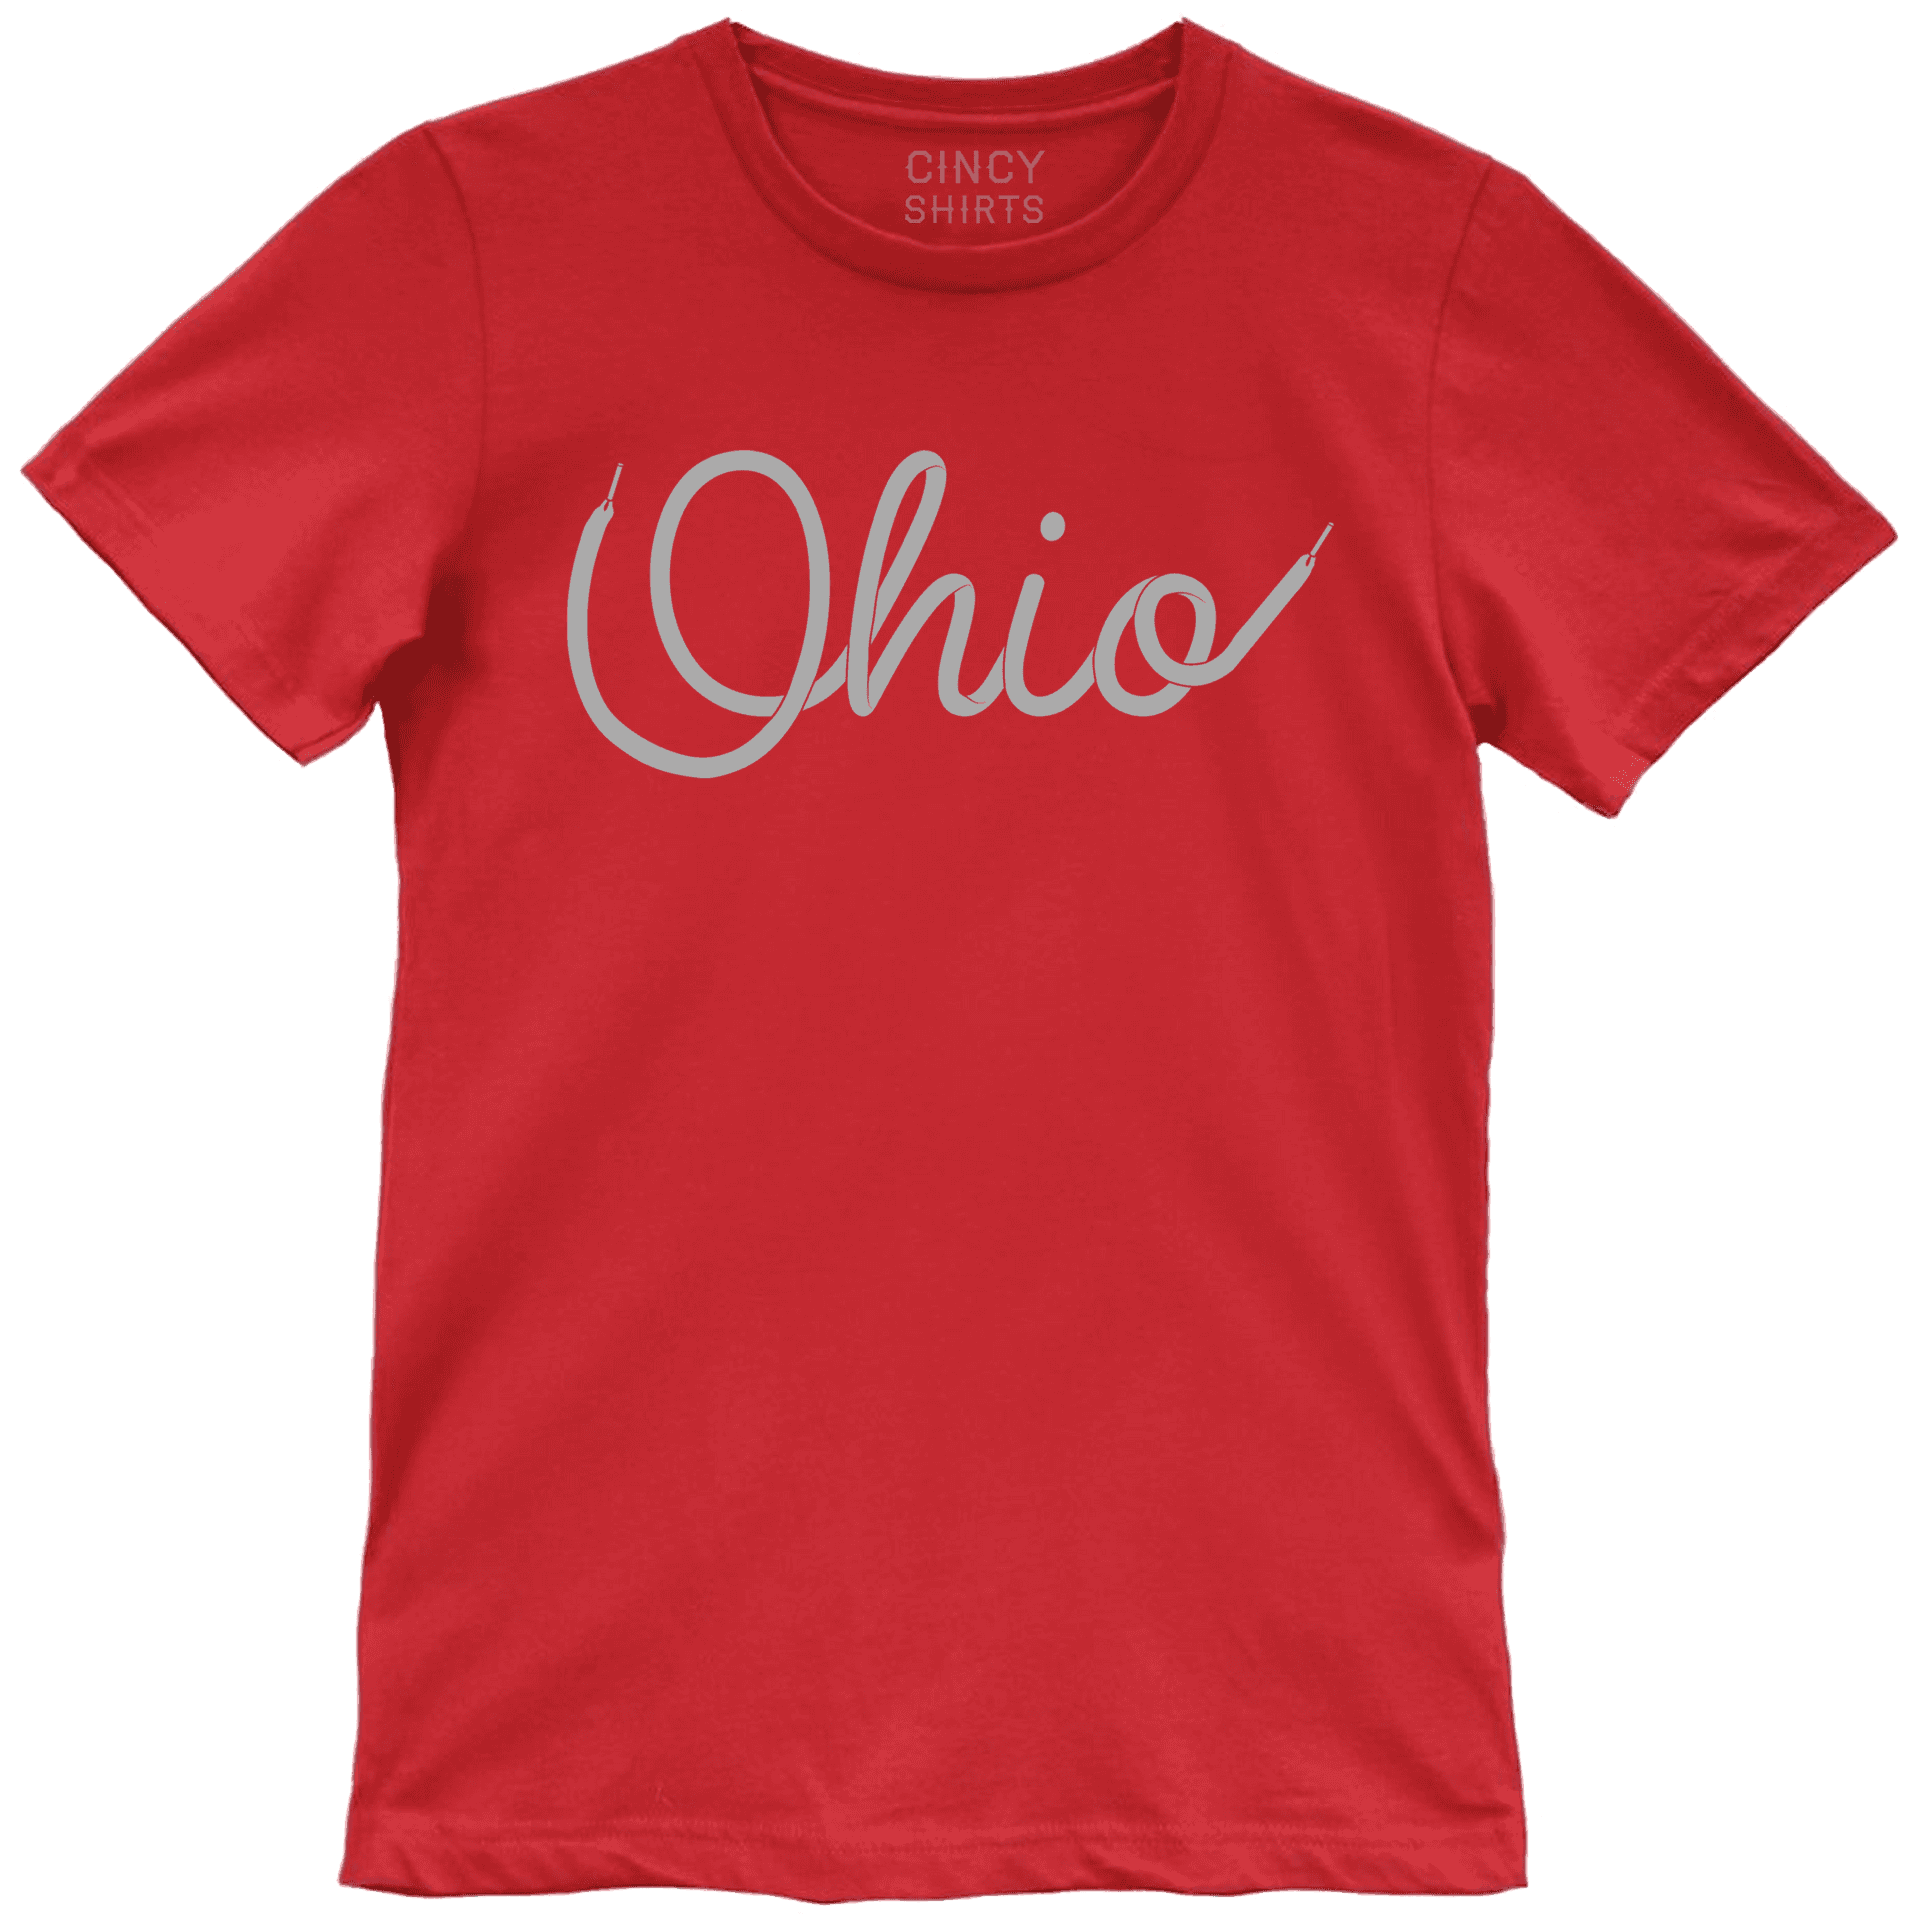 Red Ohio Tshirt Graphic PNG image